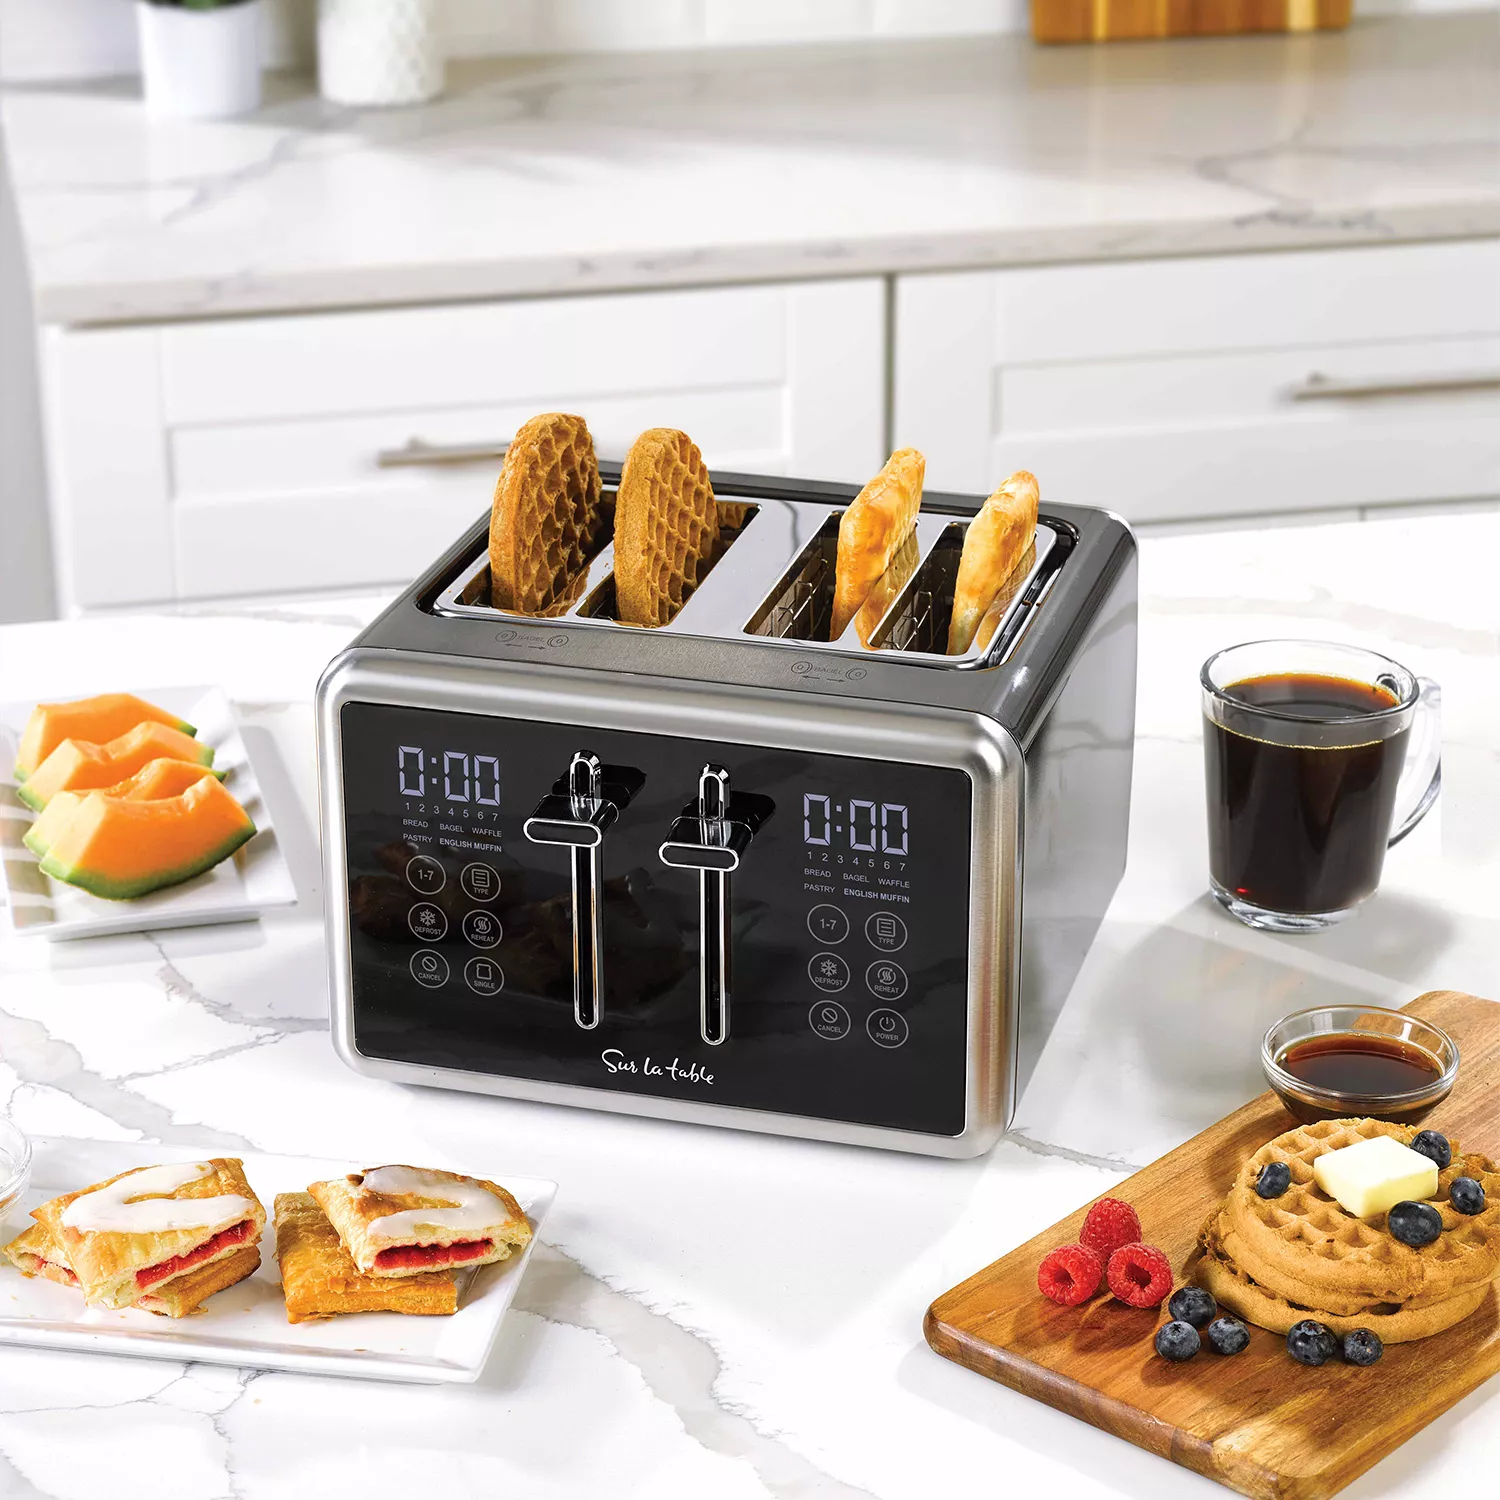 Breville The Bit More™ Toaster 4-Slice Long-Slot - Spoons N Spice